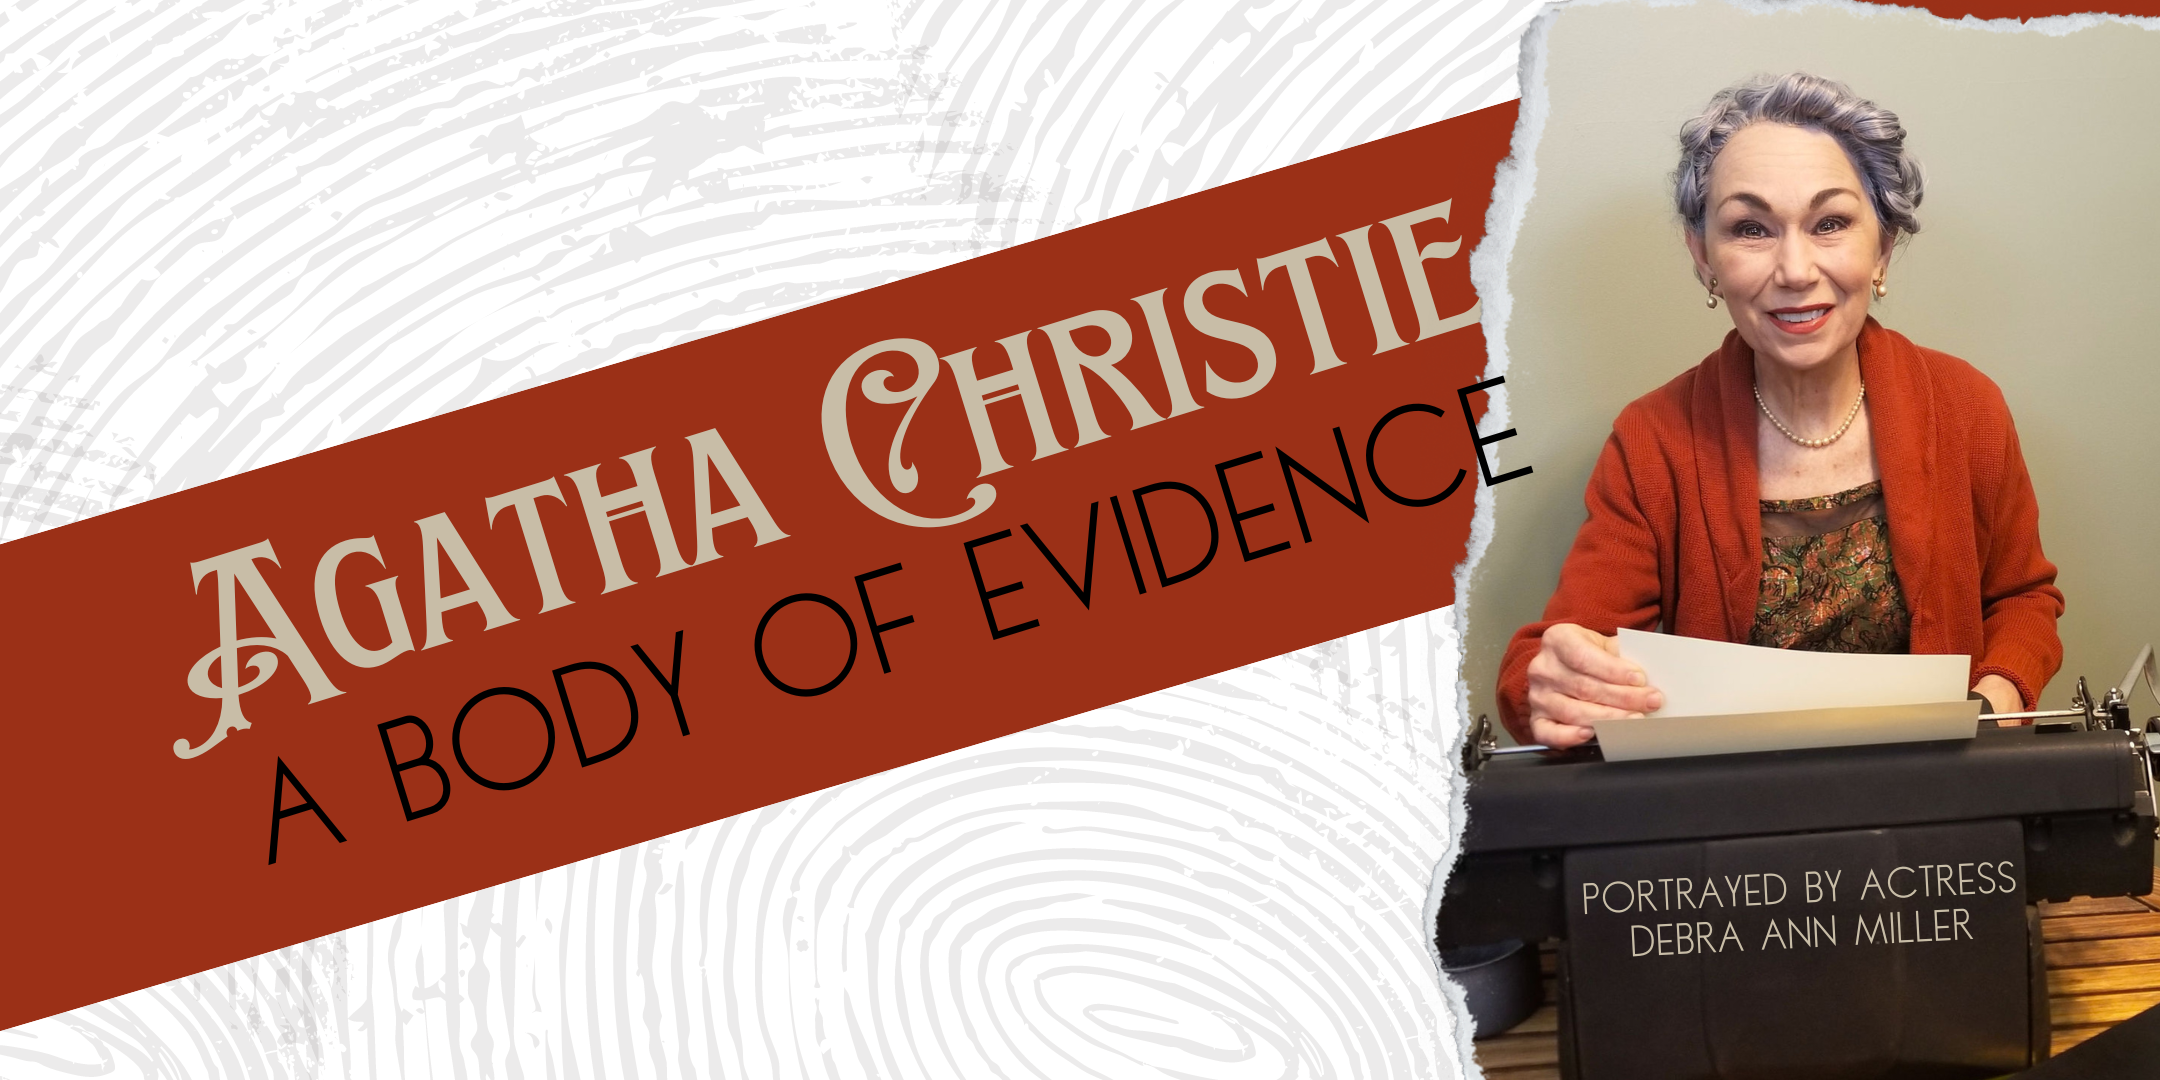 image of "Agatha Christie: A Body of Evidence"